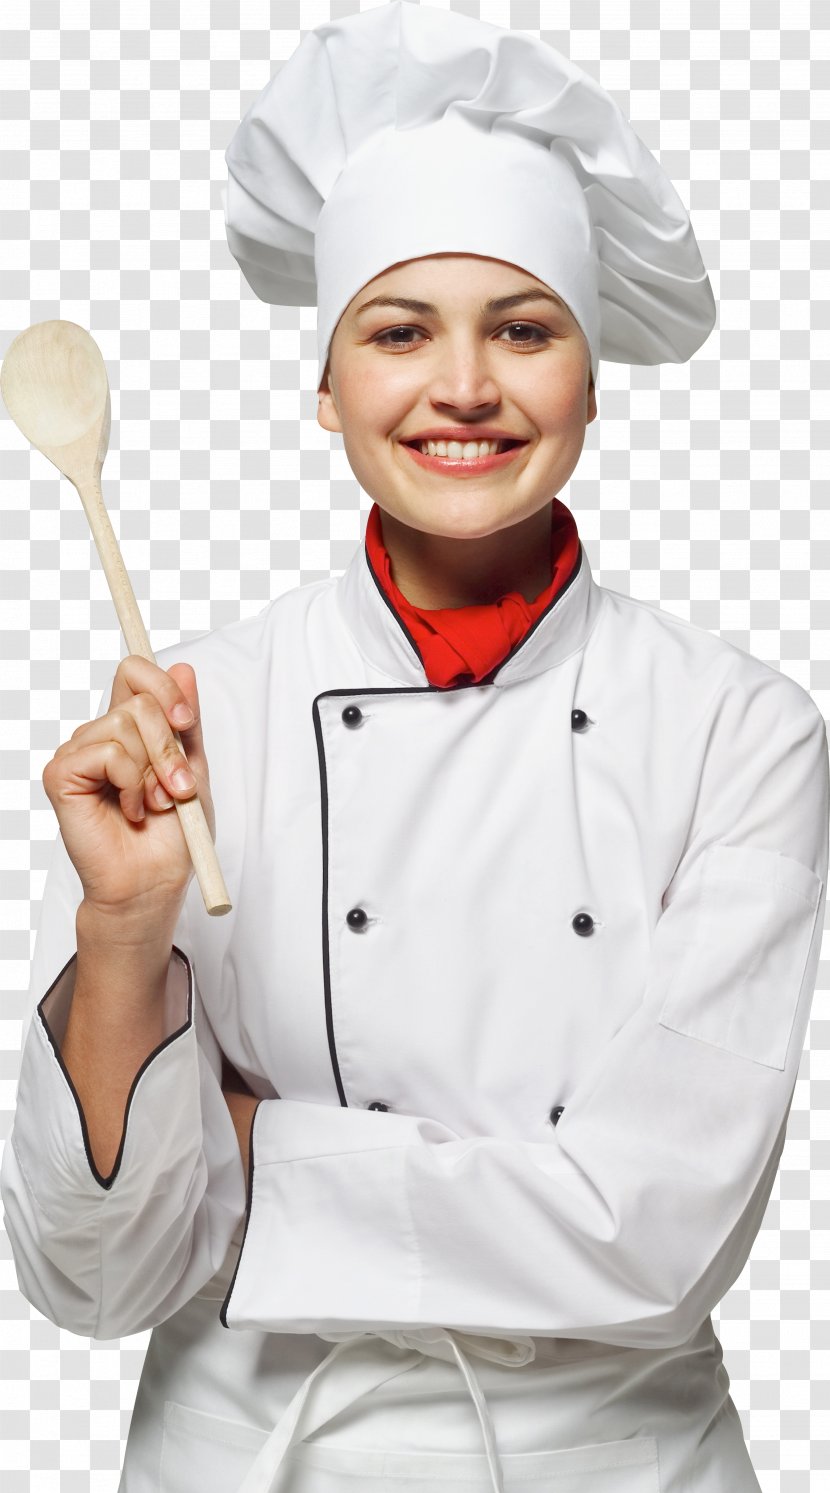 Indian Cuisine Fusion French Chinese Chef - S Uniform Transparent PNG